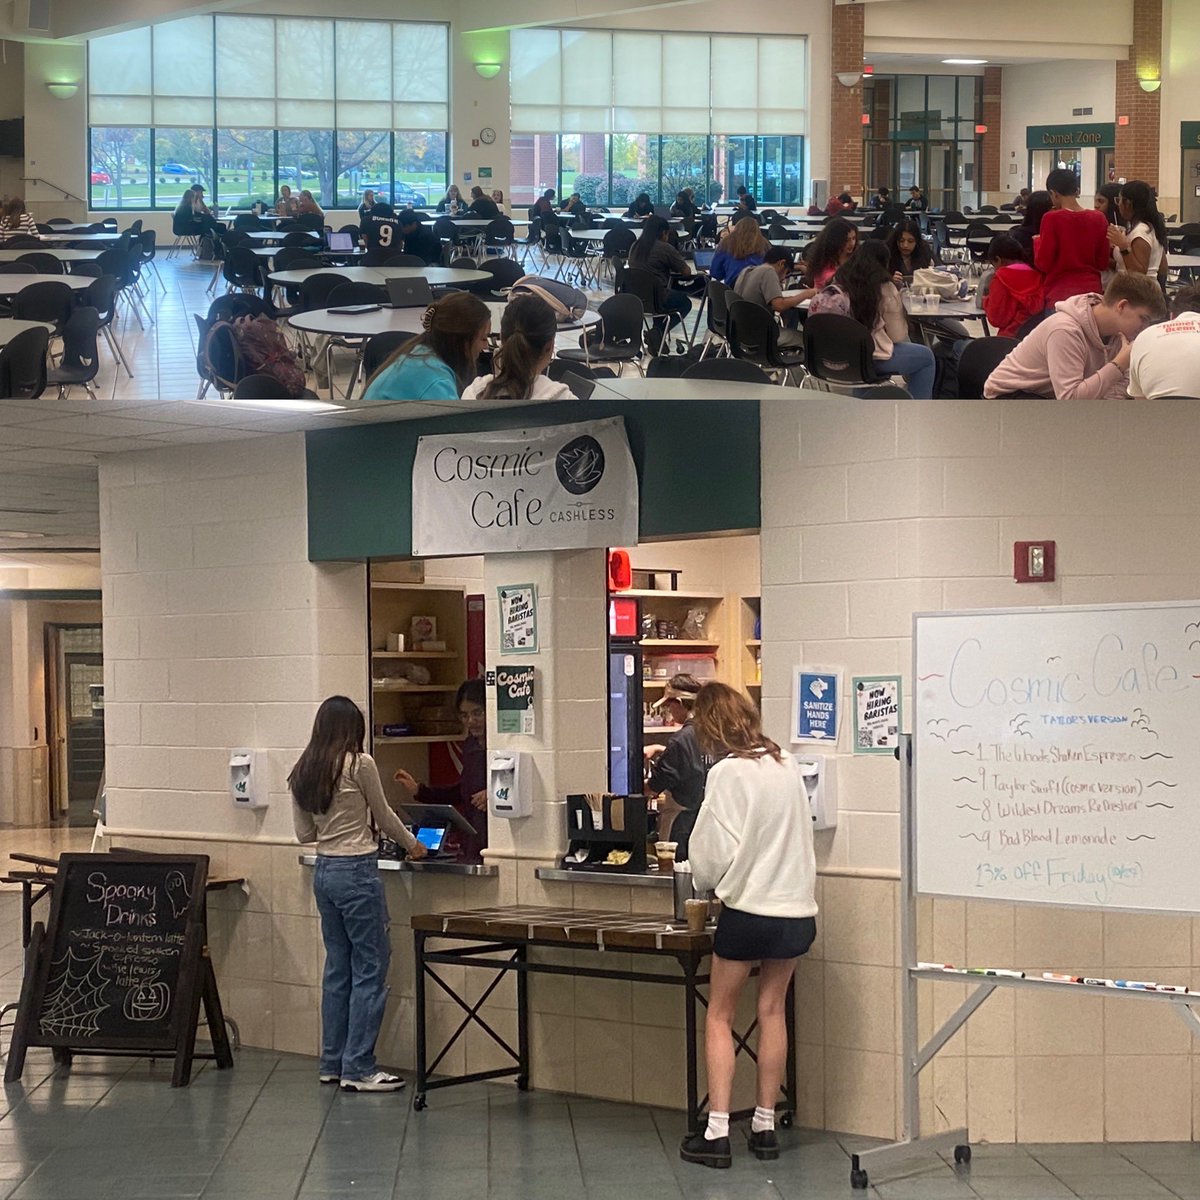 Student run Cosmic Cafe helping to provide a connect session for students to gather with friends to either do some school work or just socialize for a bit, excited for future growth and providing authentic learning and a space for students to connect! #masonmoment